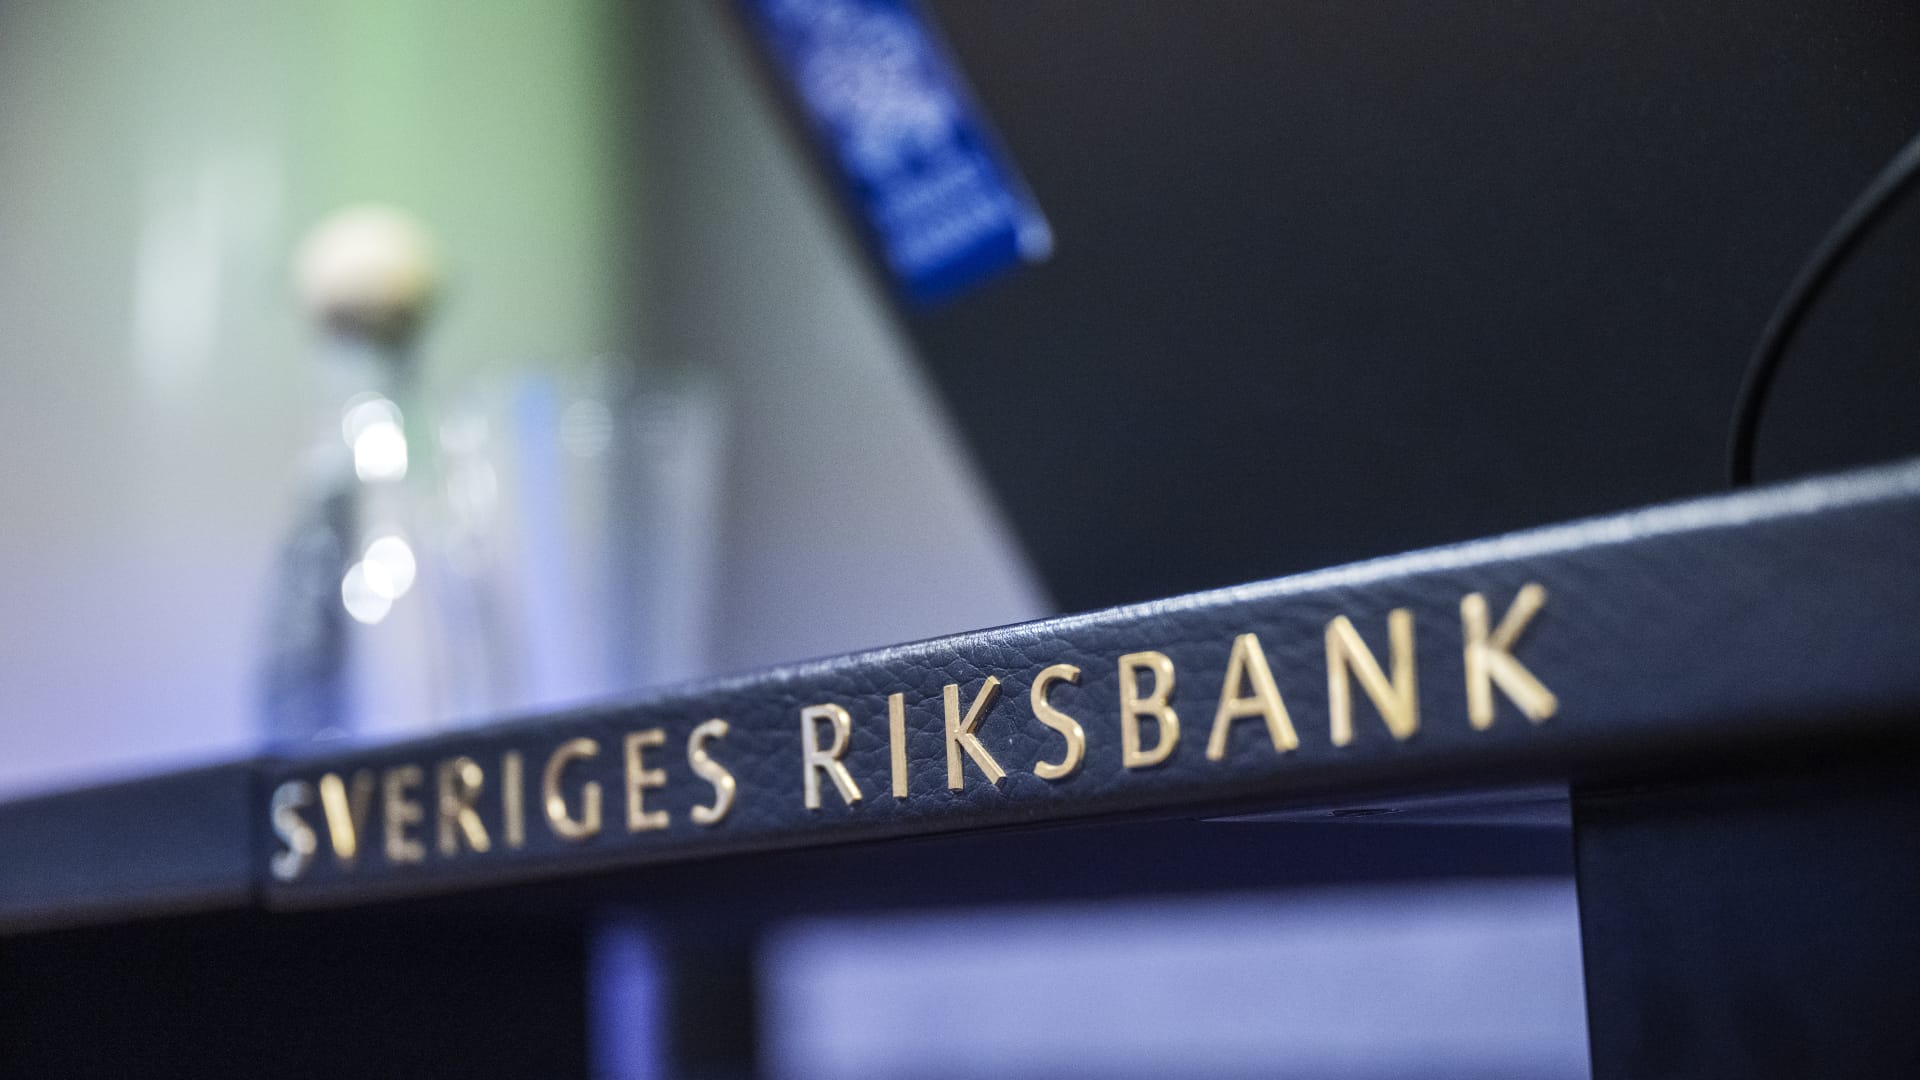 Sweden’s central bank launches 100 basis point rate hike, says ‘inflation is too..